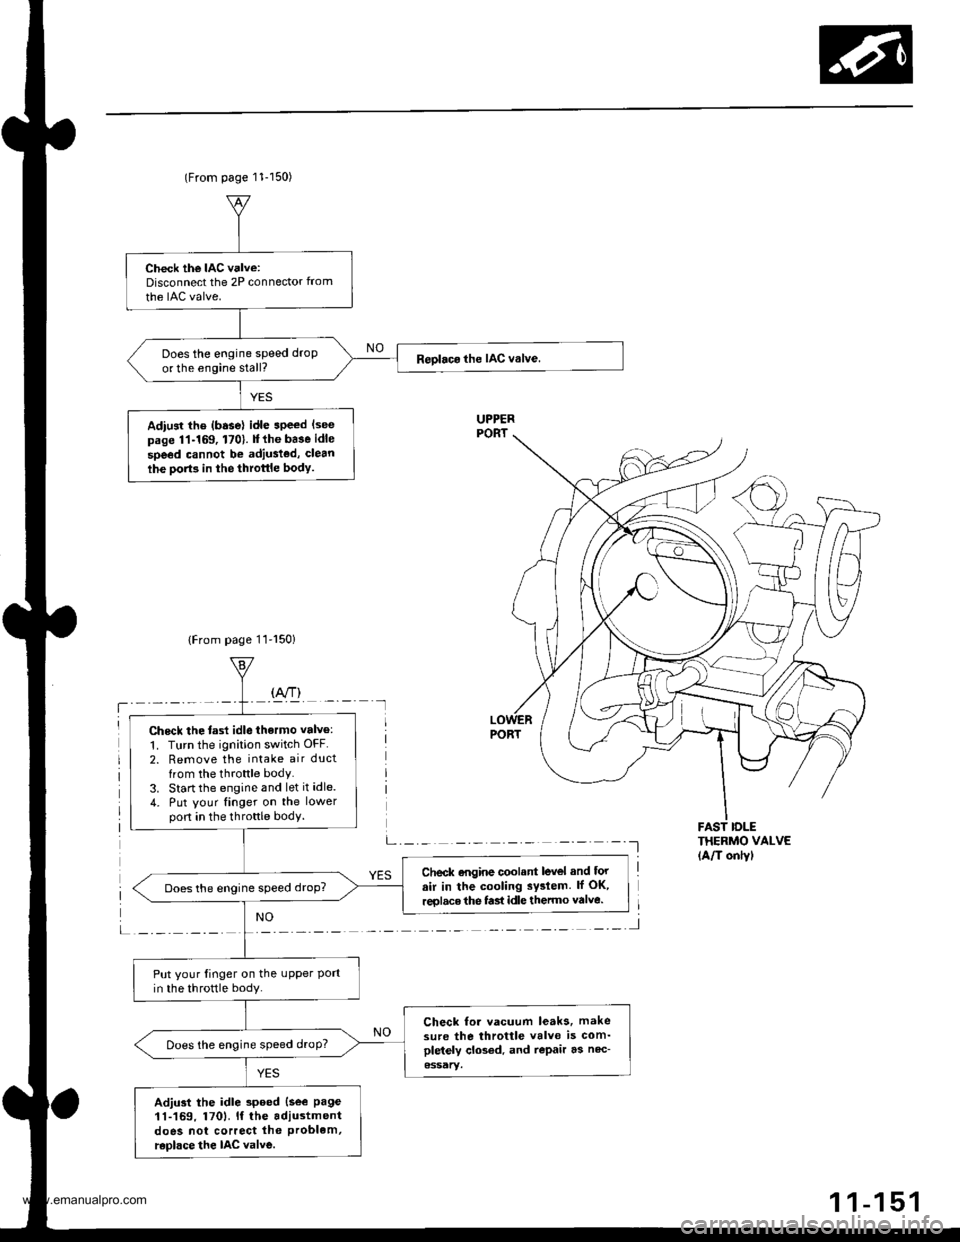 HONDA CR-V 1998 RD1-RD3 / 1.G Owners Manual 
(From page 11-150)
{From page 11-150}
THERMO VALVE(A/T onlyl
Check the IAC valve:Disconnect the 2P connector from
the IAC valve.
Does the engine speed droP
or the engine stall?
Adiust the (basel idl�